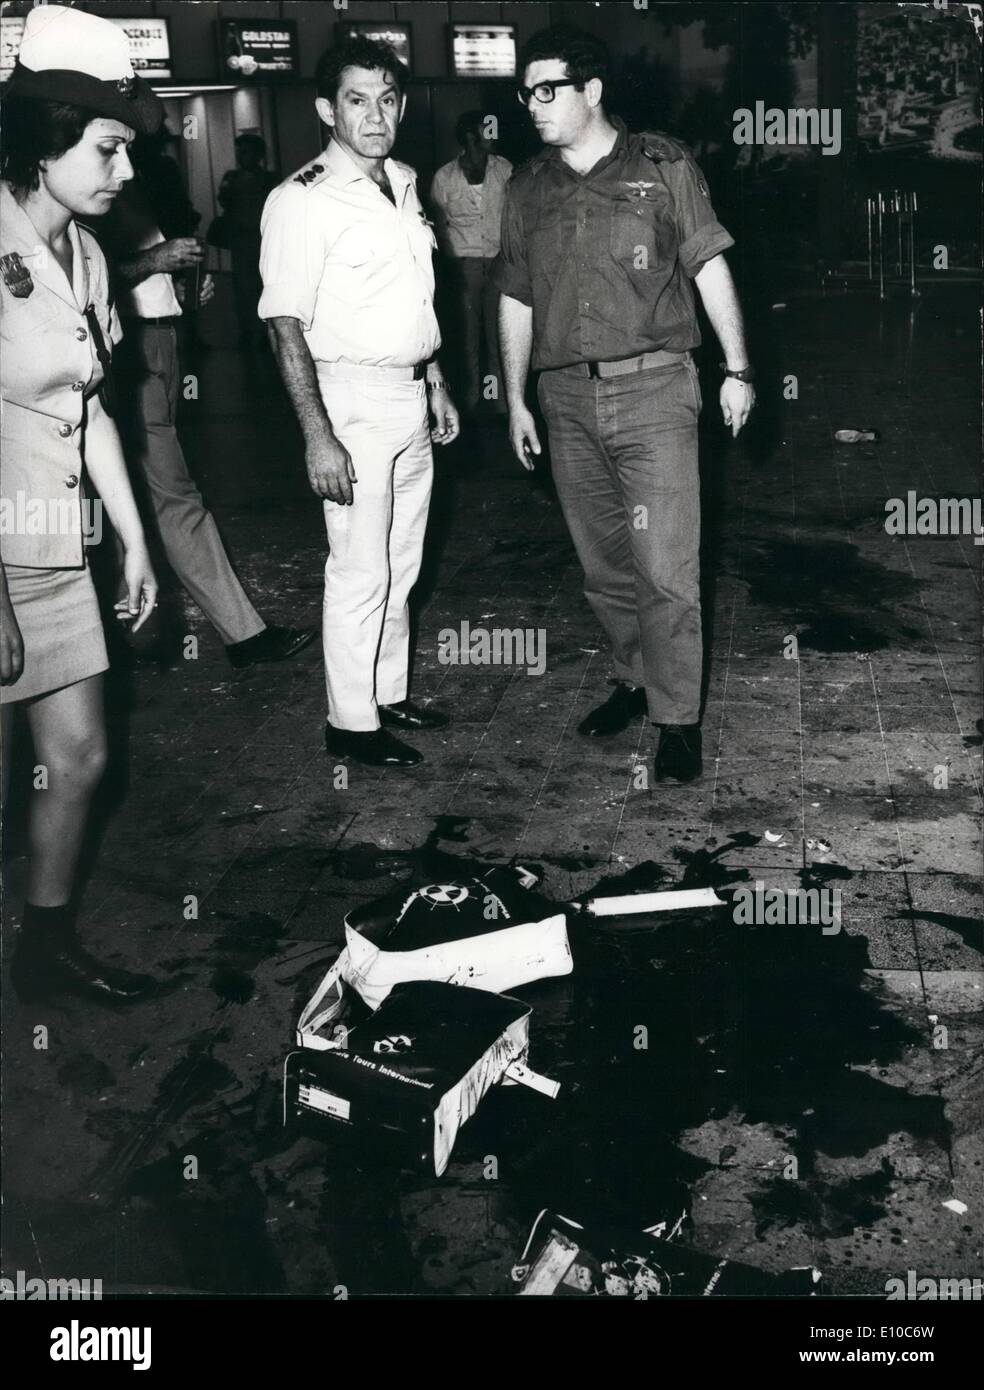 Jun. 06, 1972 - Terrorist attack ay Lydda Airport:This was the scene at Lydda Airport, Tel Aviv, after the attack by Japanese gunmen, in which 26 people were killed and many injured. Photo shows Rav Aluf David Elazar inspecting the damage at the airport. Stock Photo